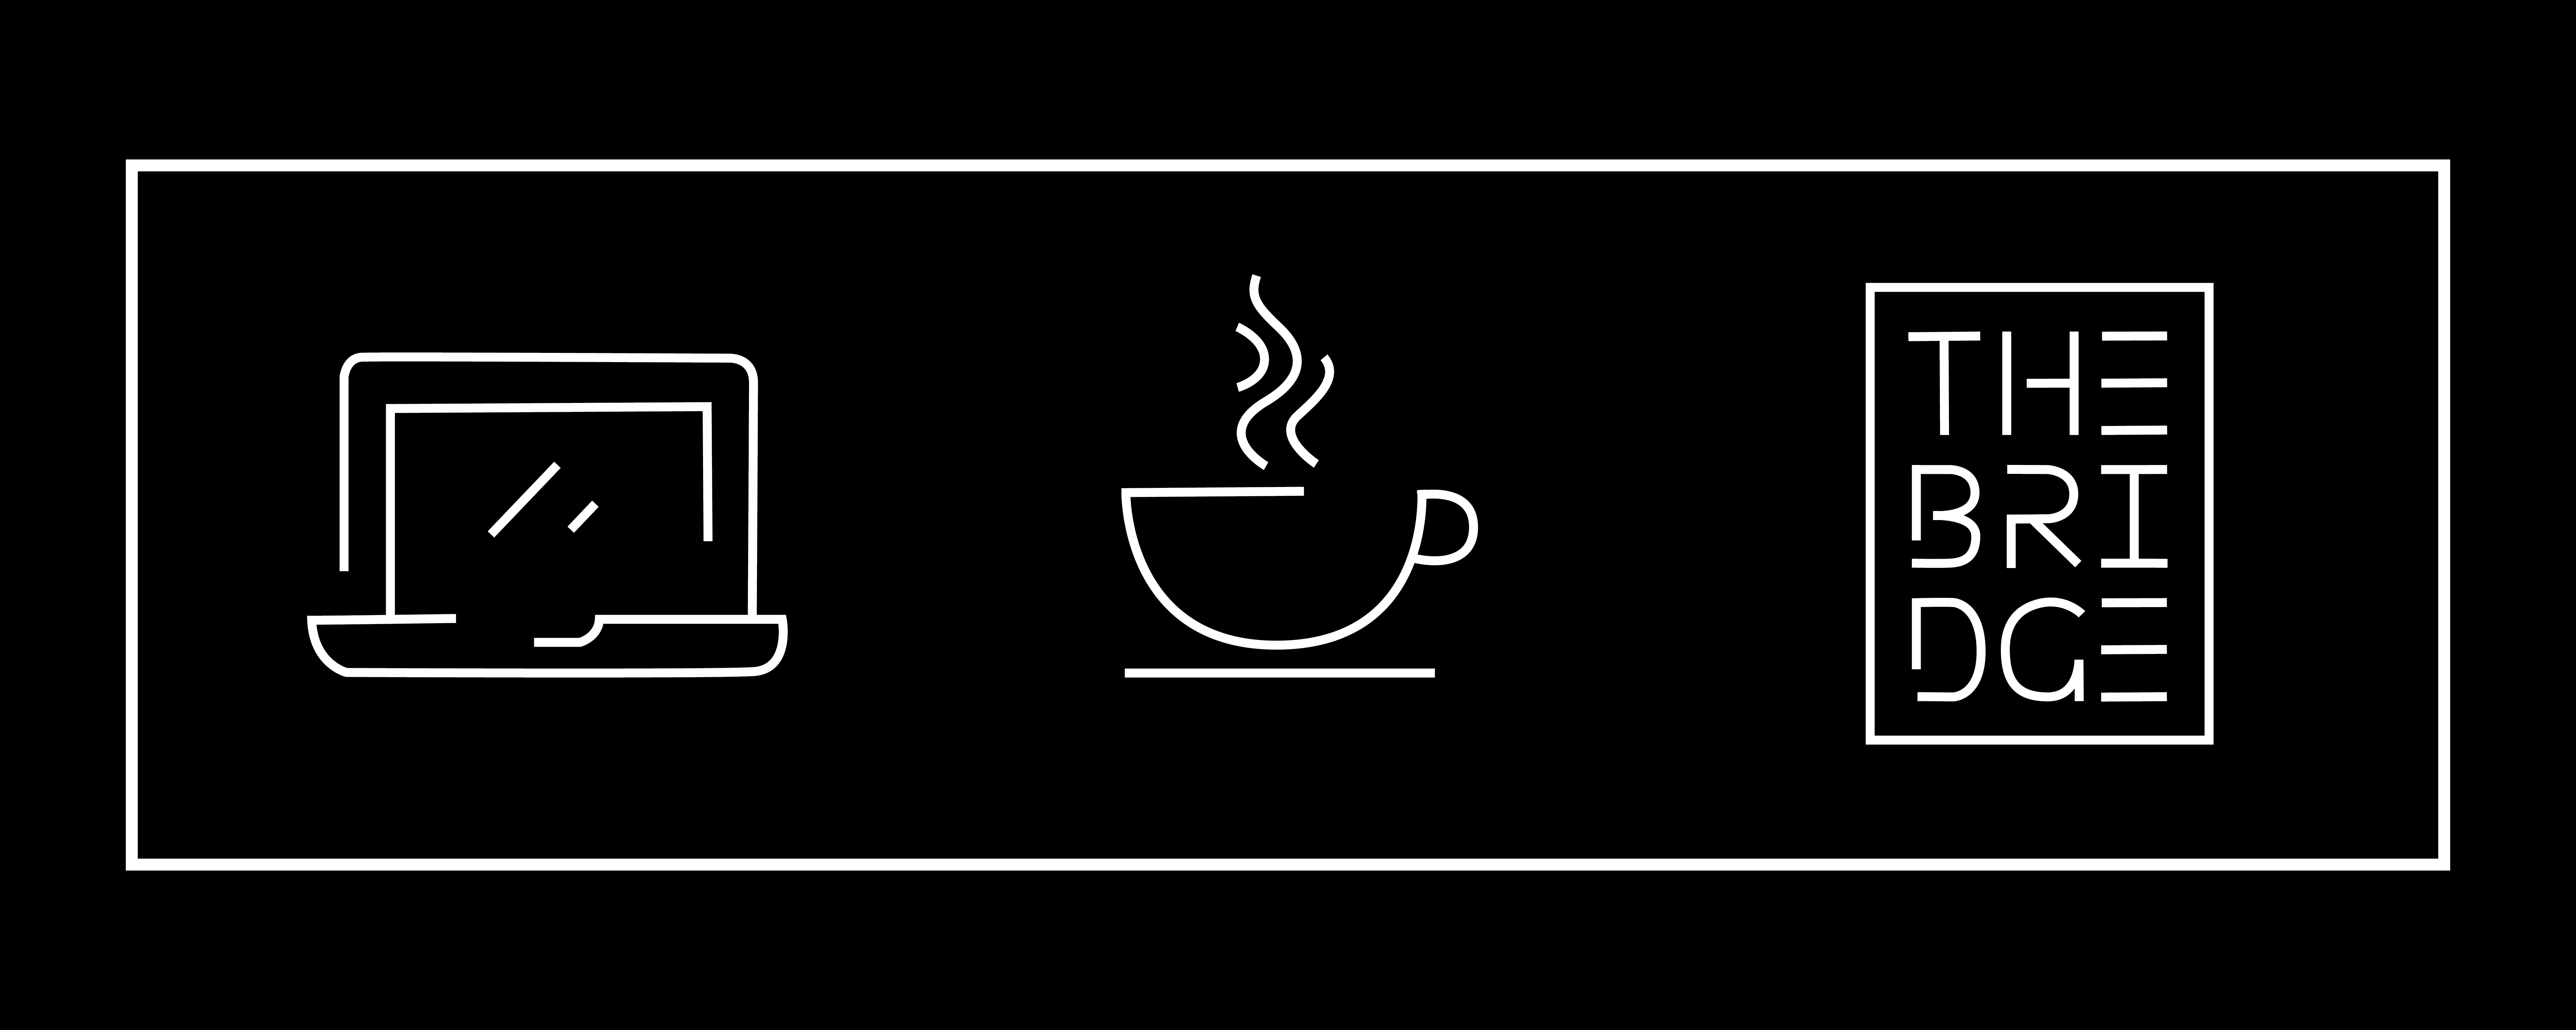 Decorative banner image for The Bridge Cafe that includes a laptop and coffee cup.